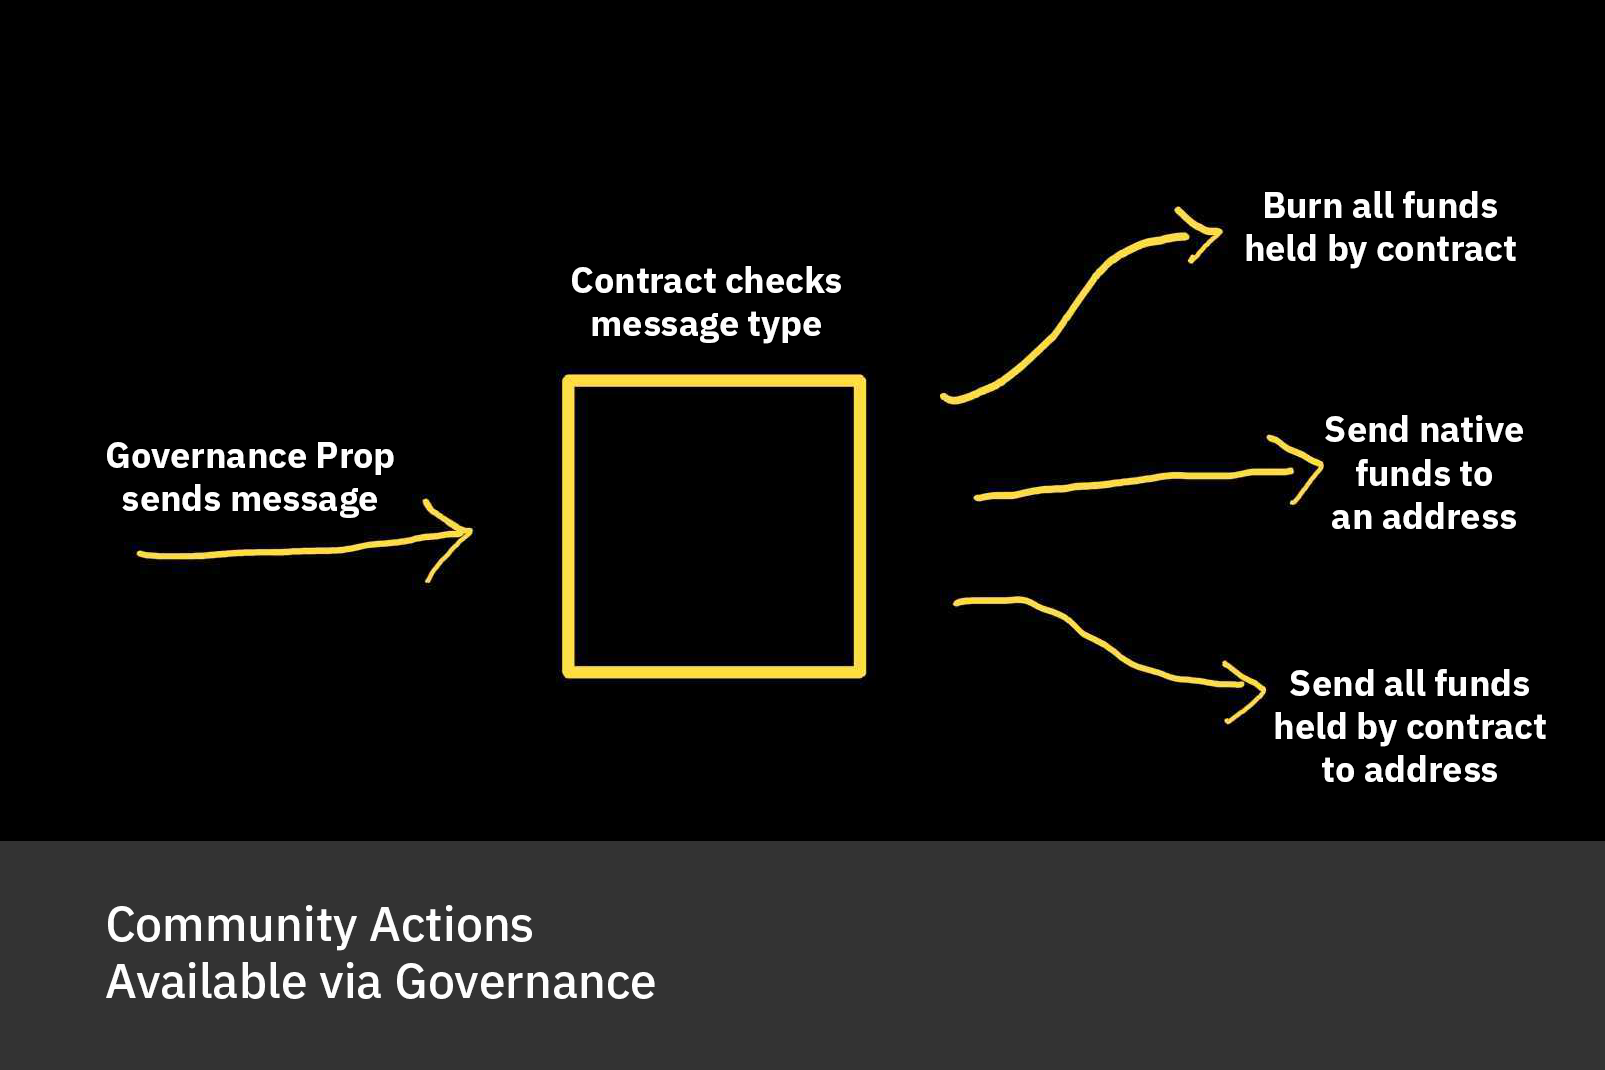 Actions available via the governance module